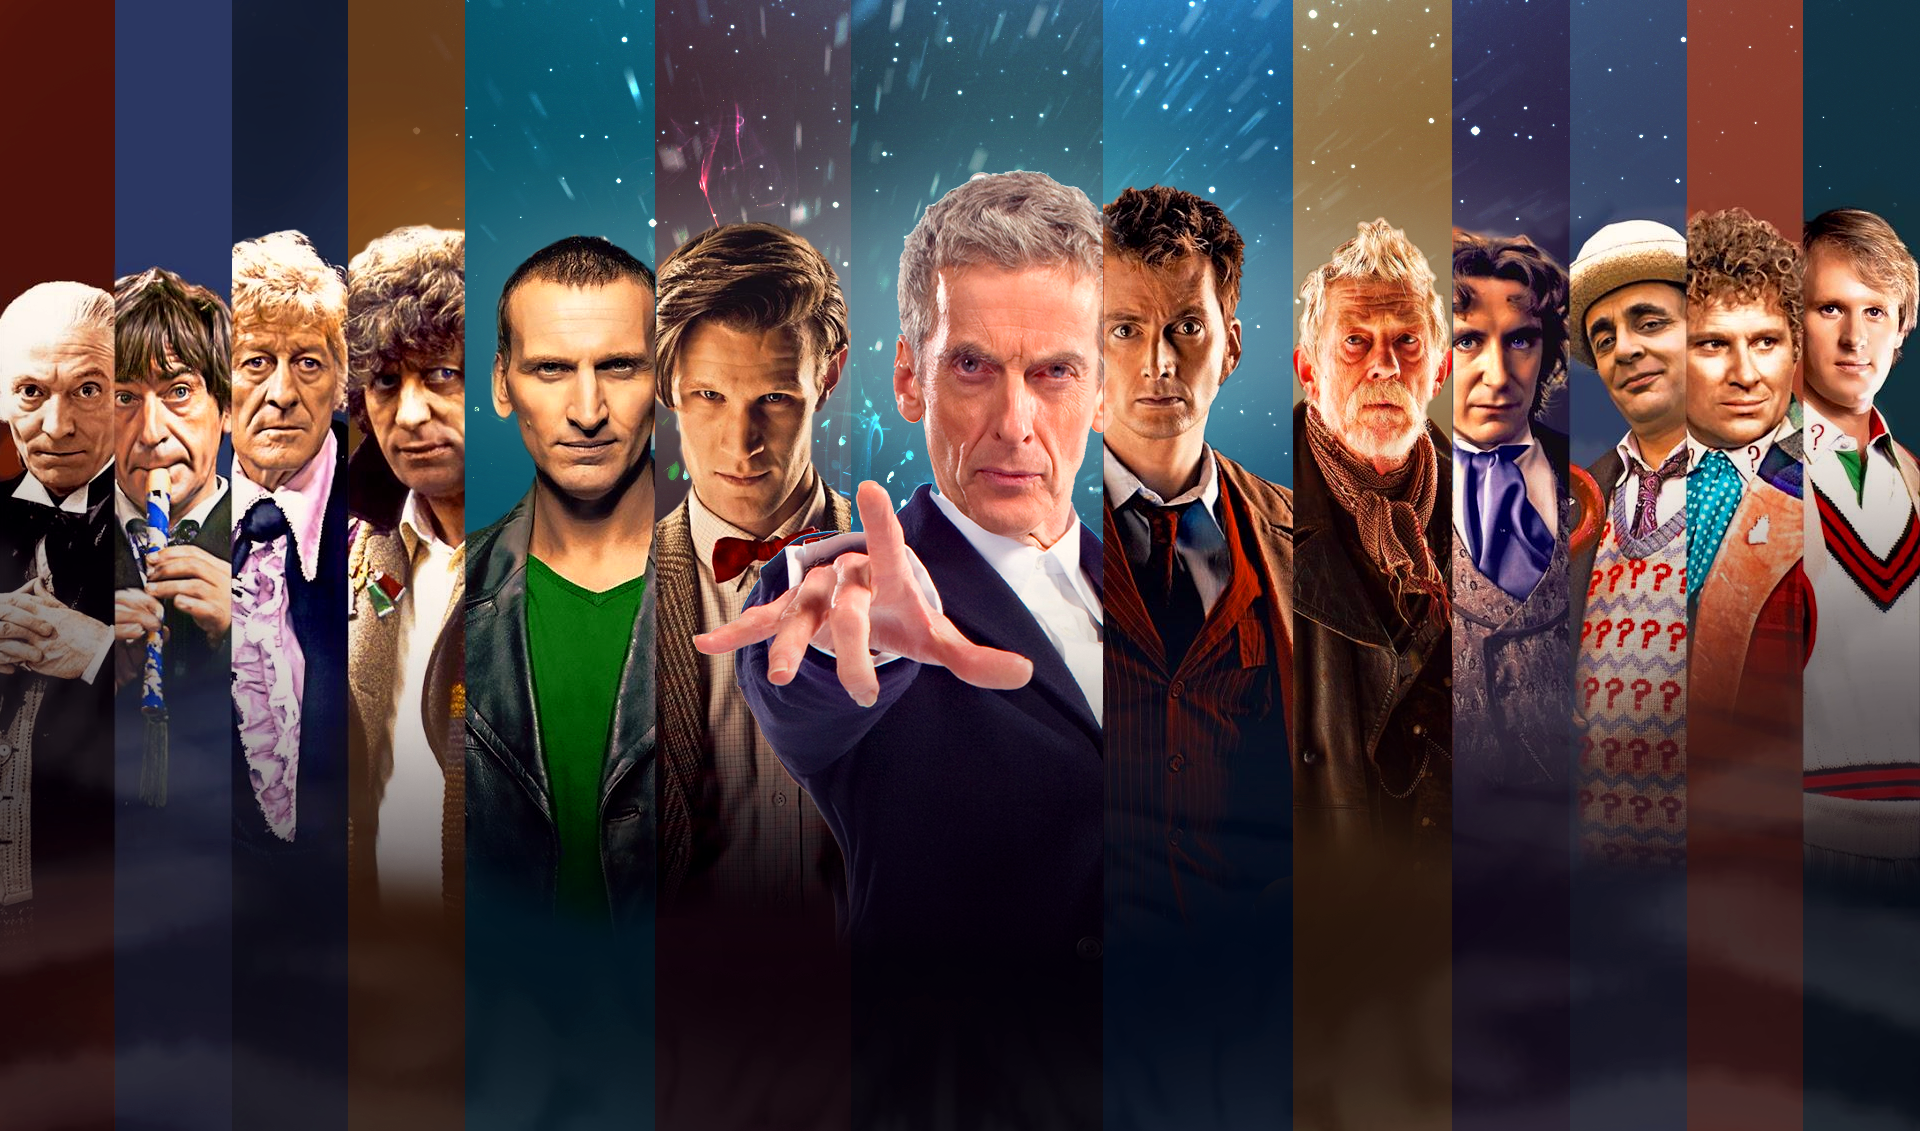 All Doctors Doctor Who I